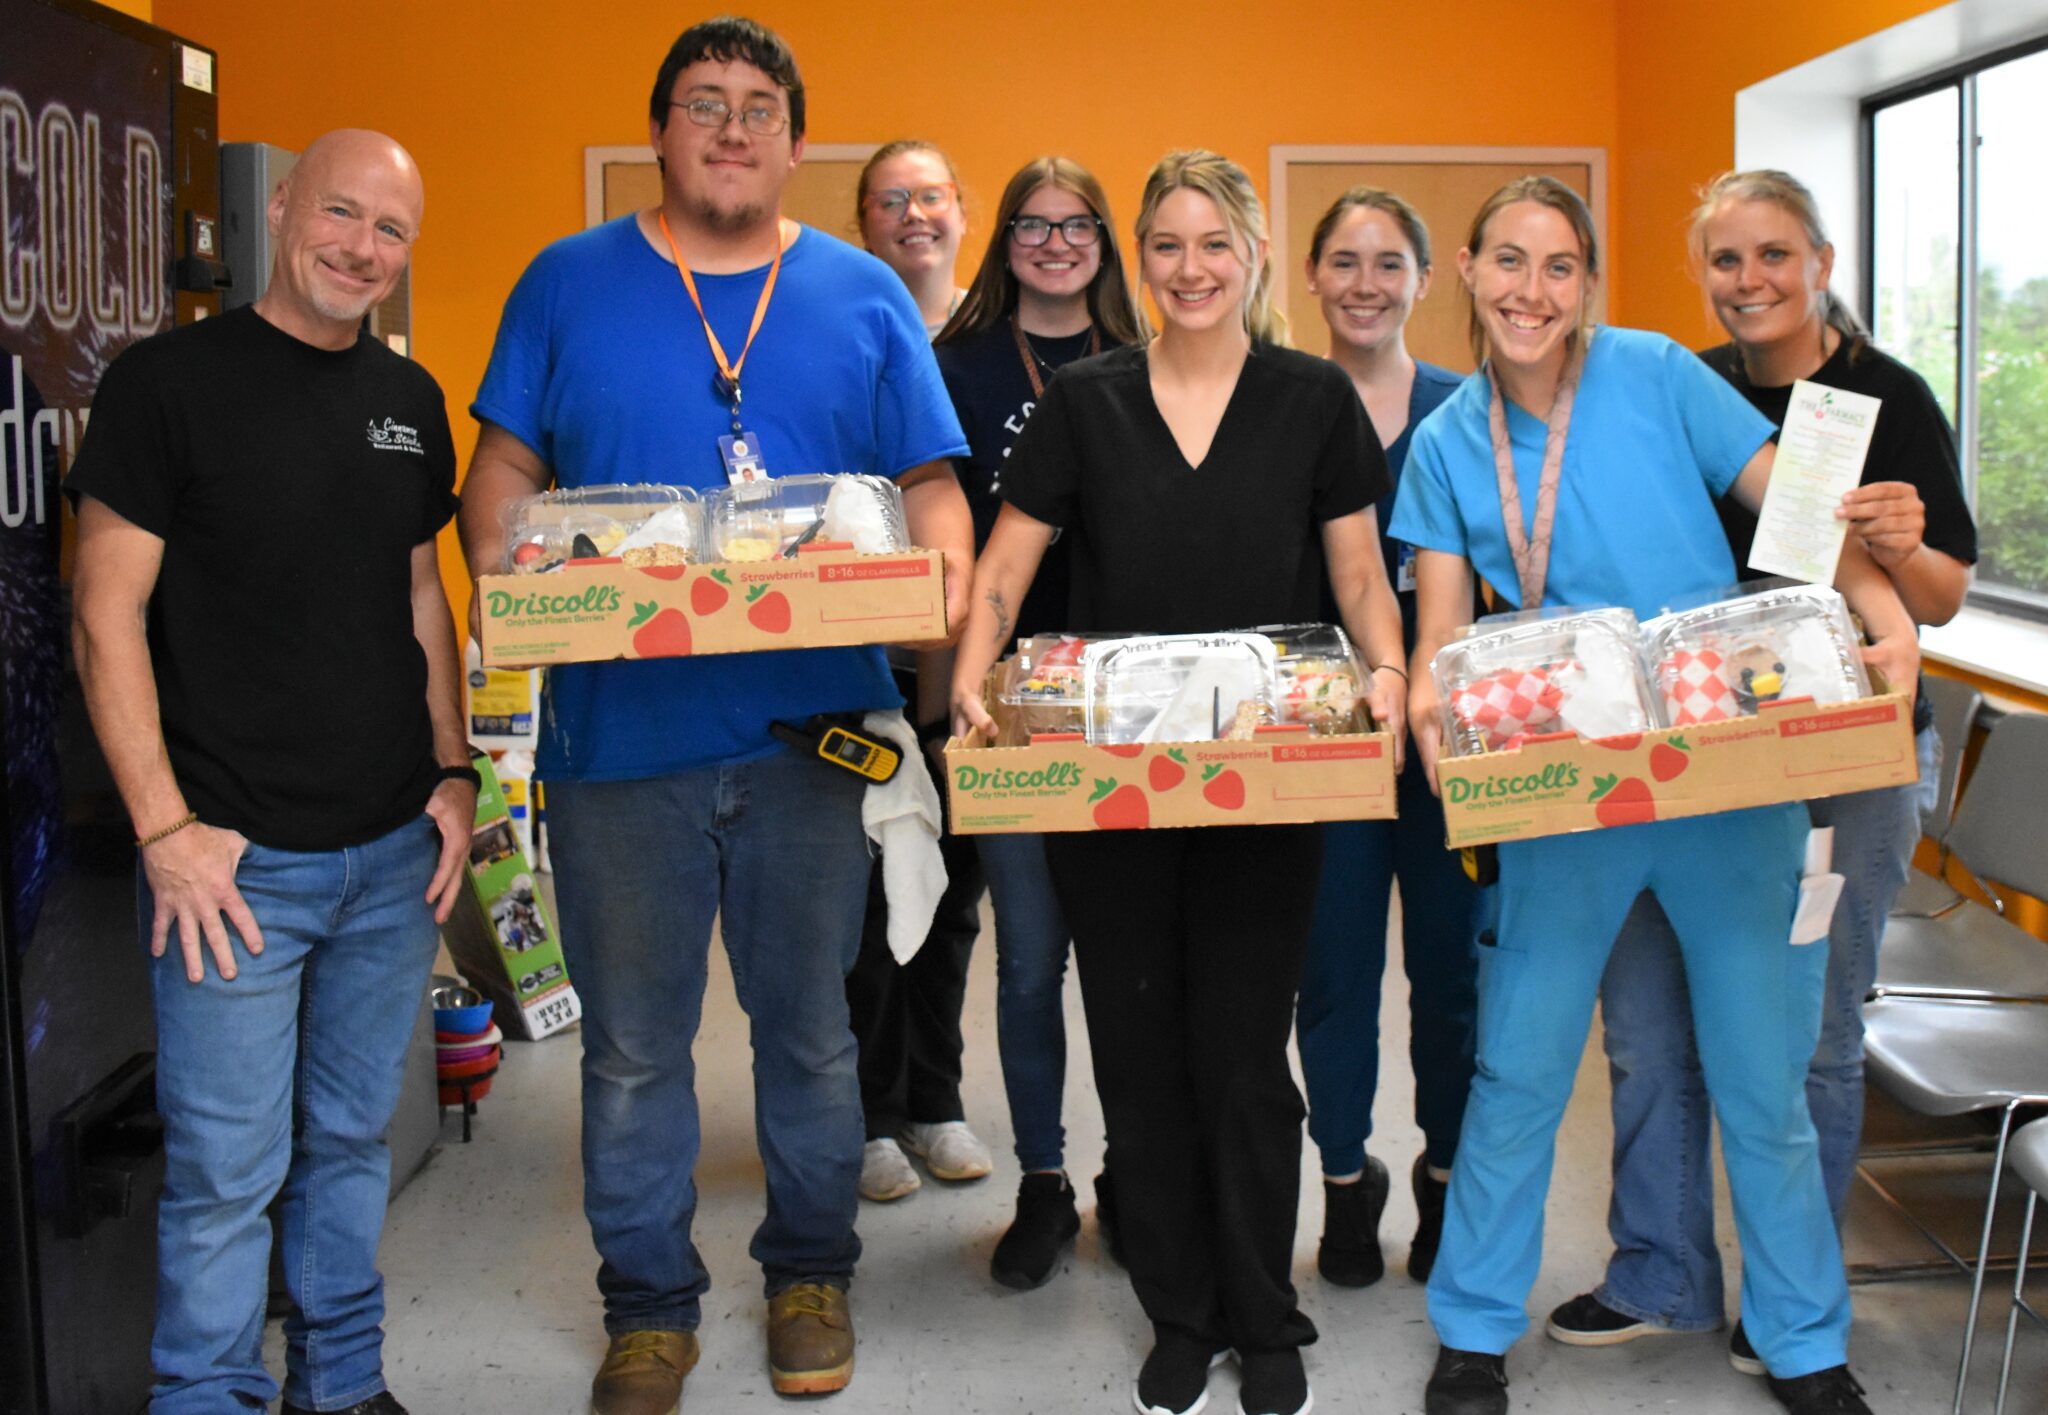 On June 25, 2021, Dillon’s Cinnamon Sticks restaurant prepared and delivered meals for each of the 17 staff members at Citrus County Animal Services (CCAS).